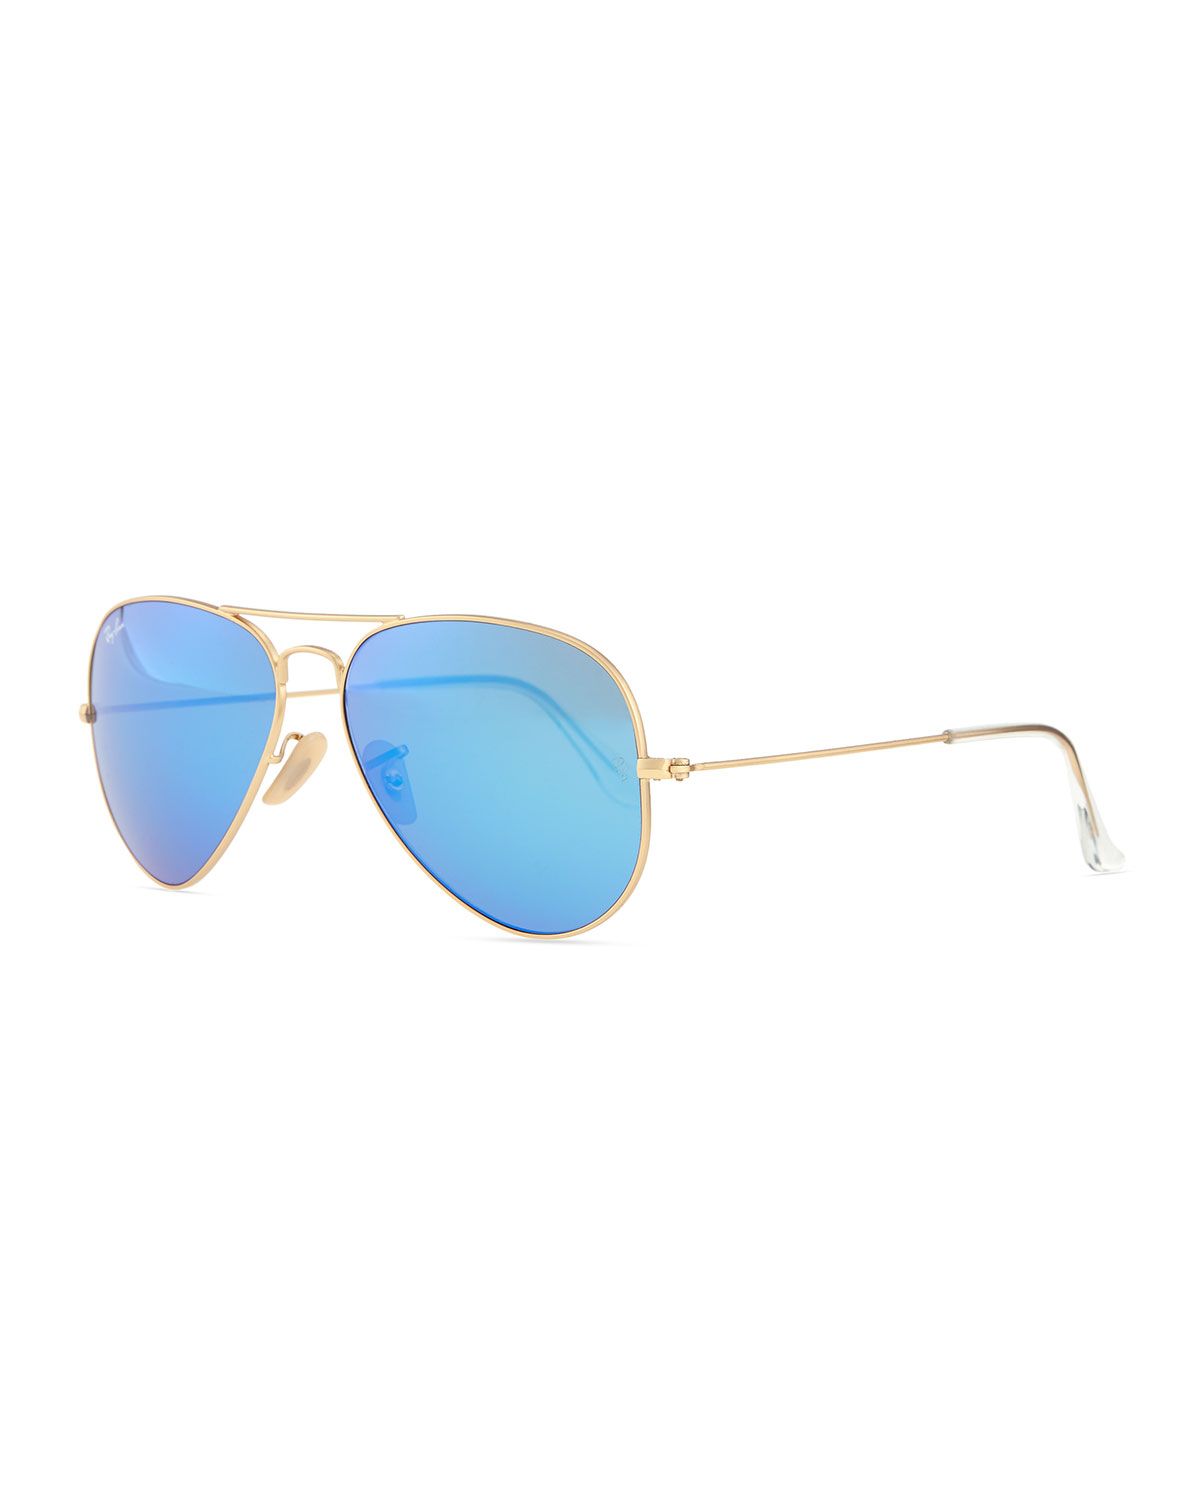 Aviator Sunglasses with Flash Lenses, Gold/Blue Mirror - Ray-Ban - Gold/Blue mirror | Neiman Marcus